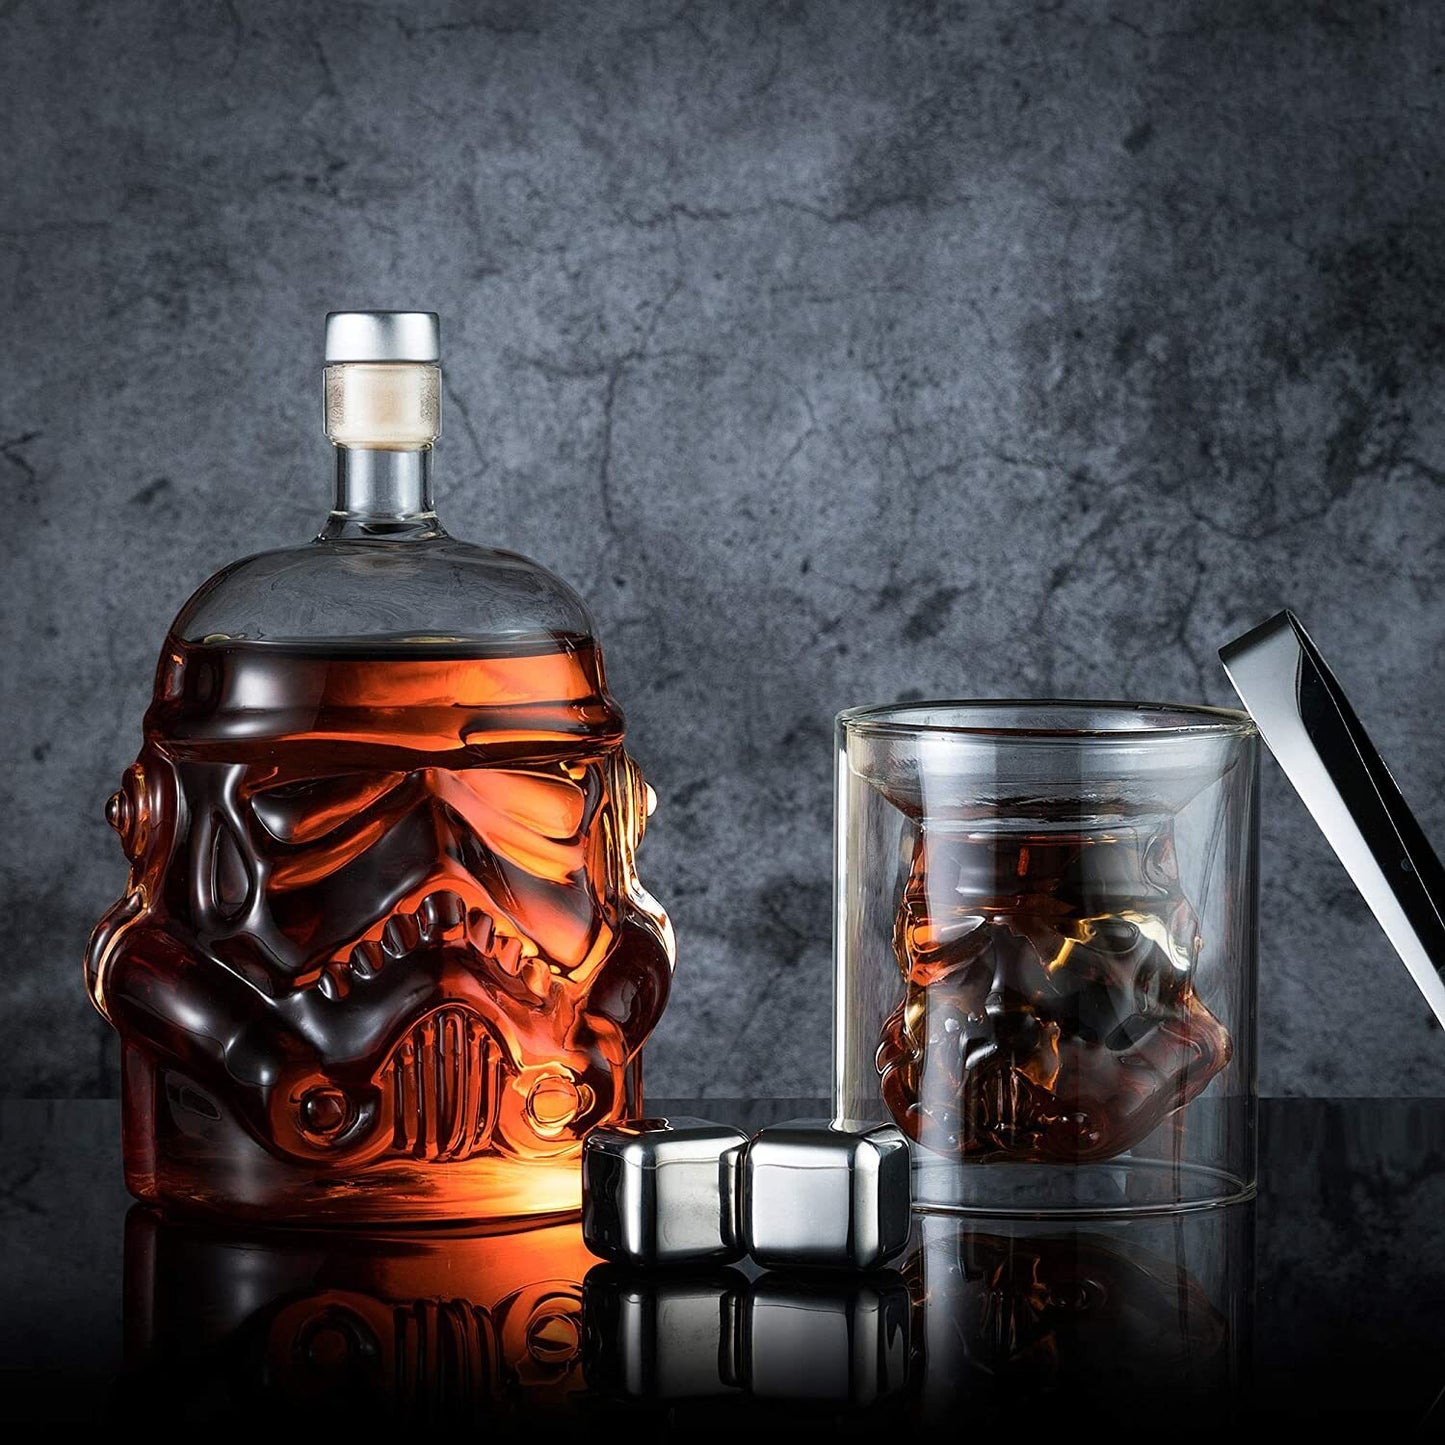 Storm Trooper - Star Wars Whiskey Decanter